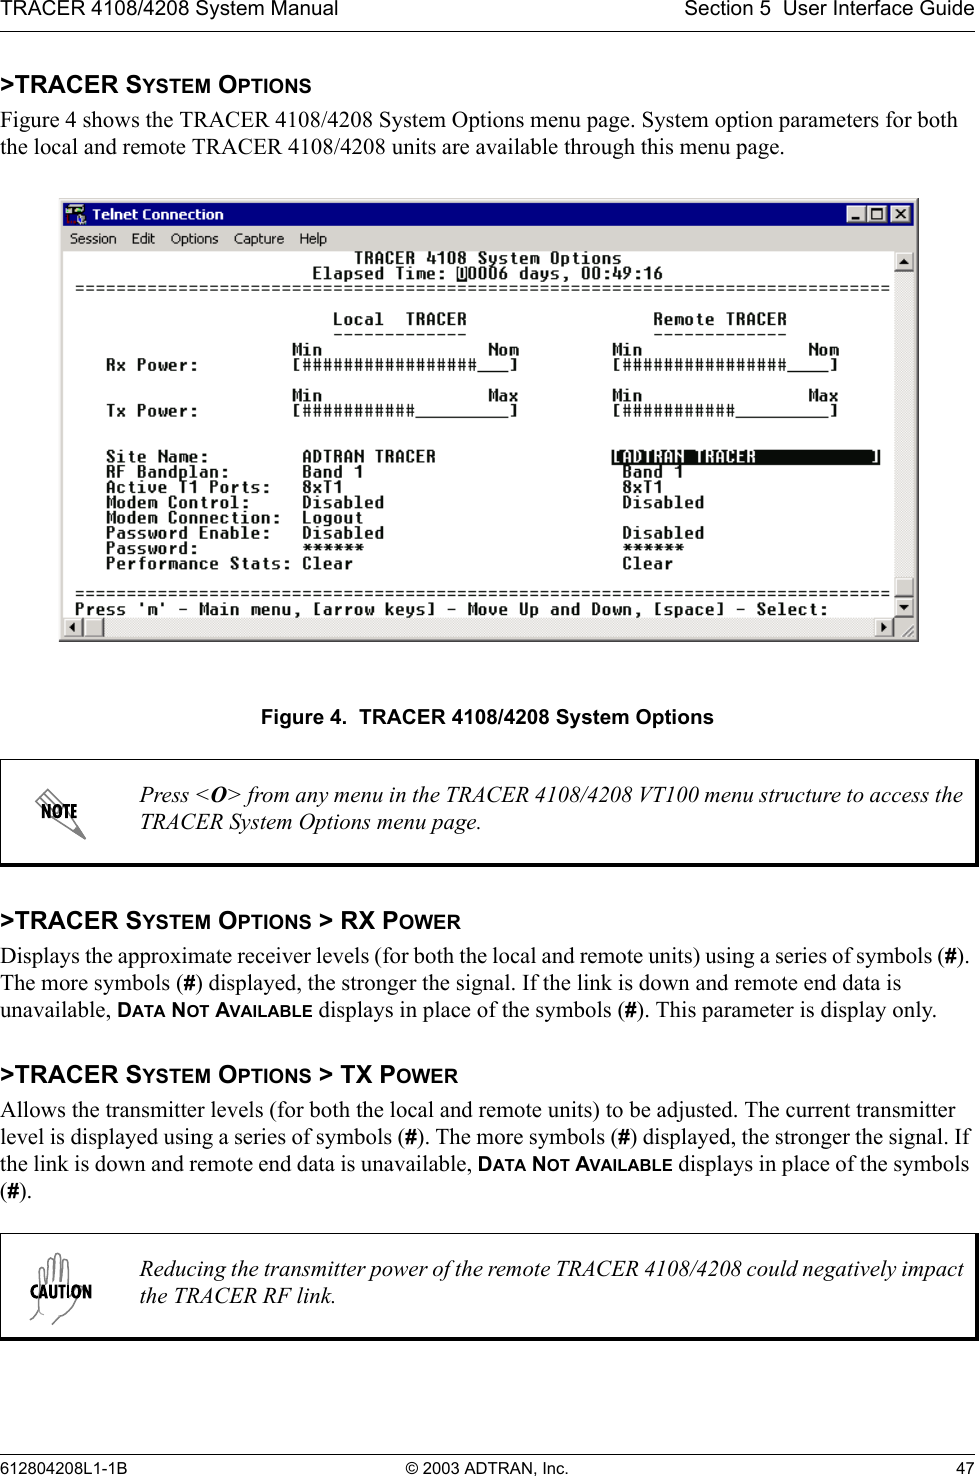 TRACER 4108/4208 System Manual Section 5  User Interface Guide612804208L1-1B © 2003 ADTRAN, Inc. 47&gt;TRACER SYSTEM OPTIONSFigure 4 shows the TRACER 4108/4208 System Options menu page. System option parameters for both the local and remote TRACER 4108/4208 units are available through this menu page.Figure 4.  TRACER 4108/4208 System Options&gt;TRACER SYSTEM OPTIONS &gt; RX POWERDisplays the approximate receiver levels (for both the local and remote units) using a series of symbols (#). The more symbols (#) displayed, the stronger the signal. If the link is down and remote end data is unavailable, DATA NOT AVAILABLE displays in place of the symbols (#). This parameter is display only.&gt;TRACER SYSTEM OPTIONS &gt; TX POWERAllows the transmitter levels (for both the local and remote units) to be adjusted. The current transmitter level is displayed using a series of symbols (#). The more symbols (#) displayed, the stronger the signal. If the link is down and remote end data is unavailable, DATA NOT AVAILABLE displays in place of the symbols (#).Press &lt;O&gt; from any menu in the TRACER 4108/4208 VT100 menu structure to access the TRACER System Options menu page.Reducing the transmitter power of the remote TRACER 4108/4208 could negatively impact the TRACER RF link.